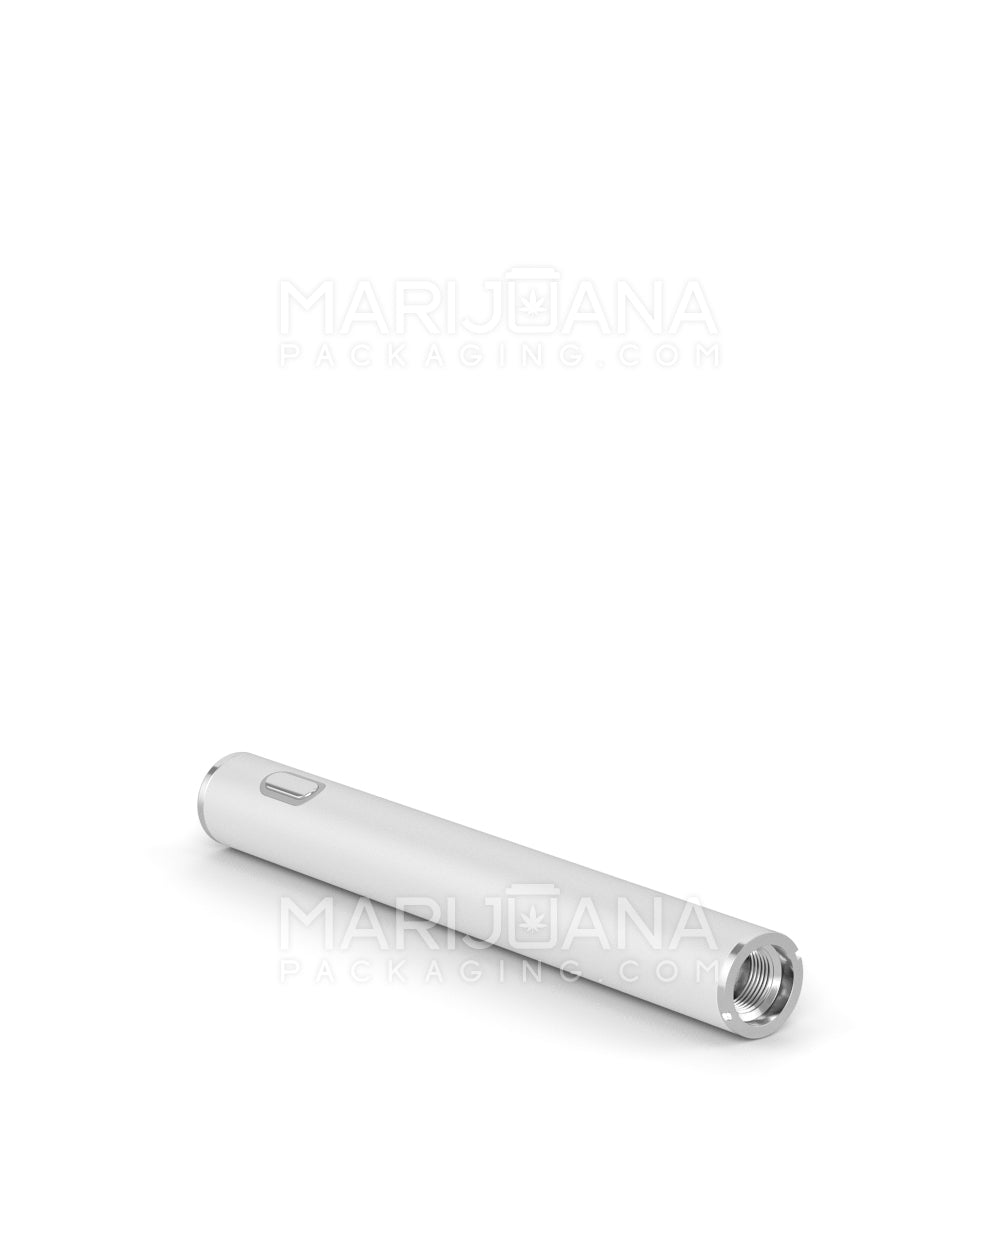 RAE | Instant Draw Activated Vape Battery | 320mAh - White - 640 Count - 5